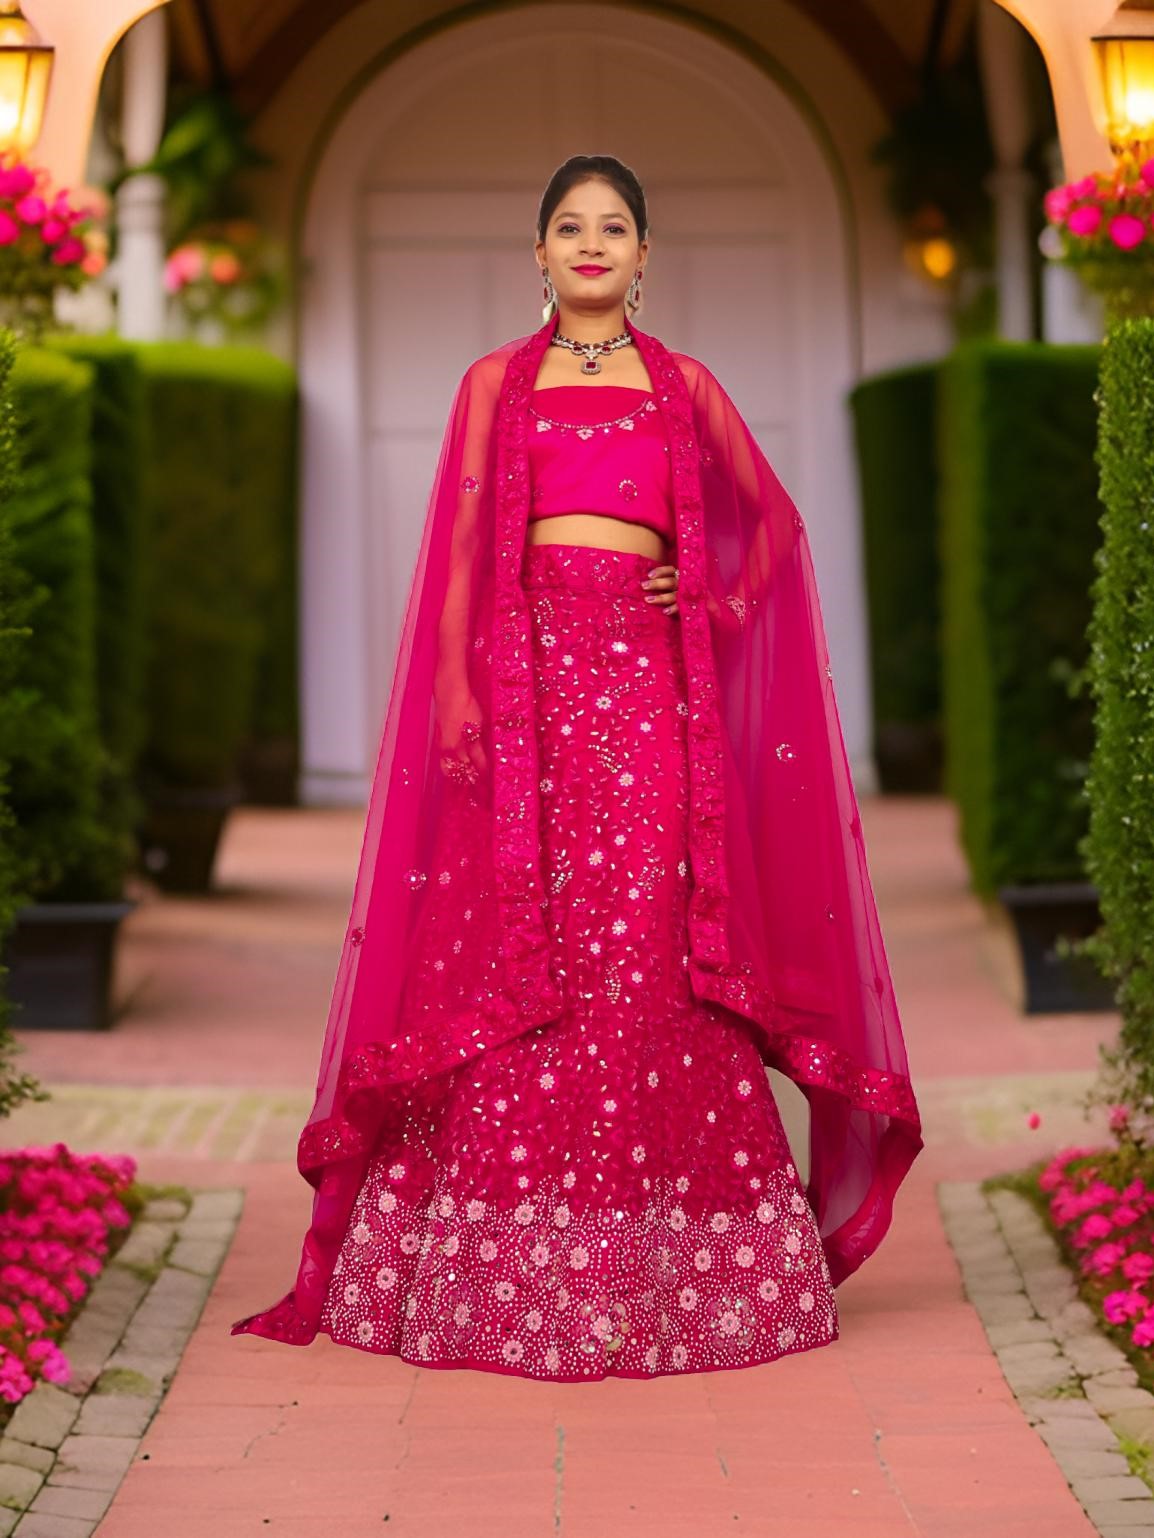 Semi-Stitched Lehenga with Sequin &amp; Embroidery Work by Shreekama Magenta Pink Semi-Stitched Lehenga for Party Festival Wedding Occasion in Noida